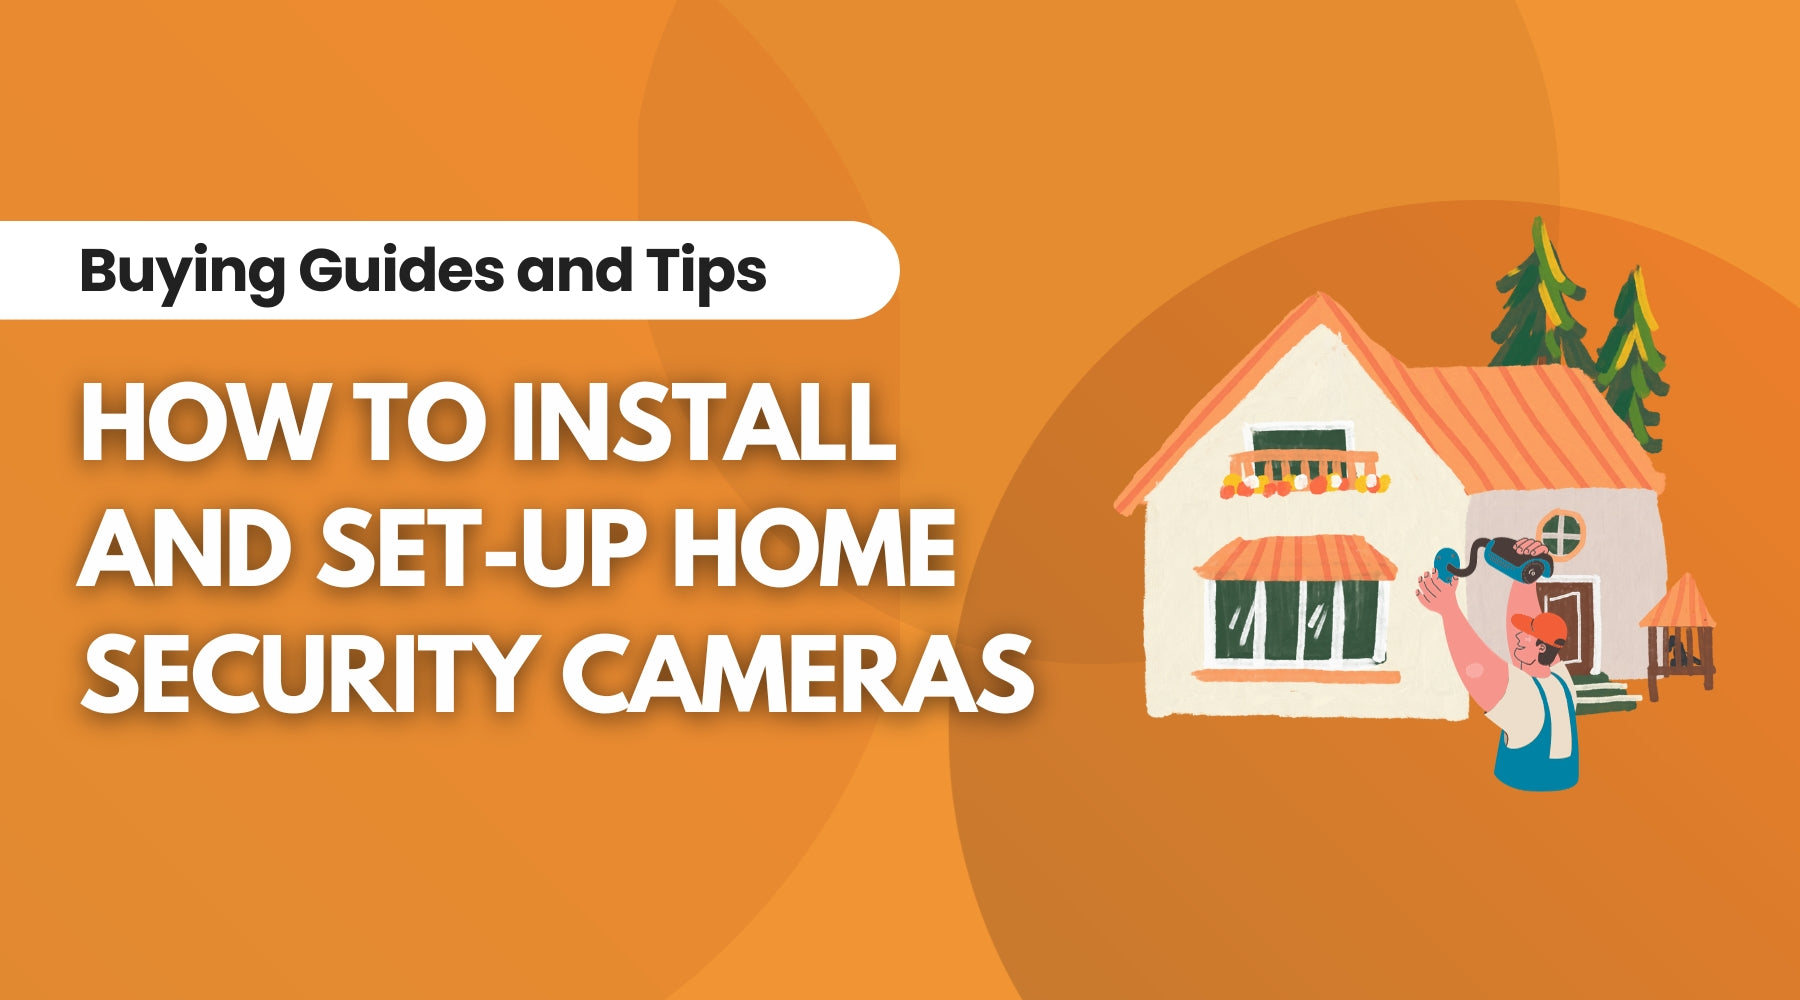 A Step-by-Step Guide to Home Security Camera Installation and Setup, Blog Written By Irwin’s Megastore